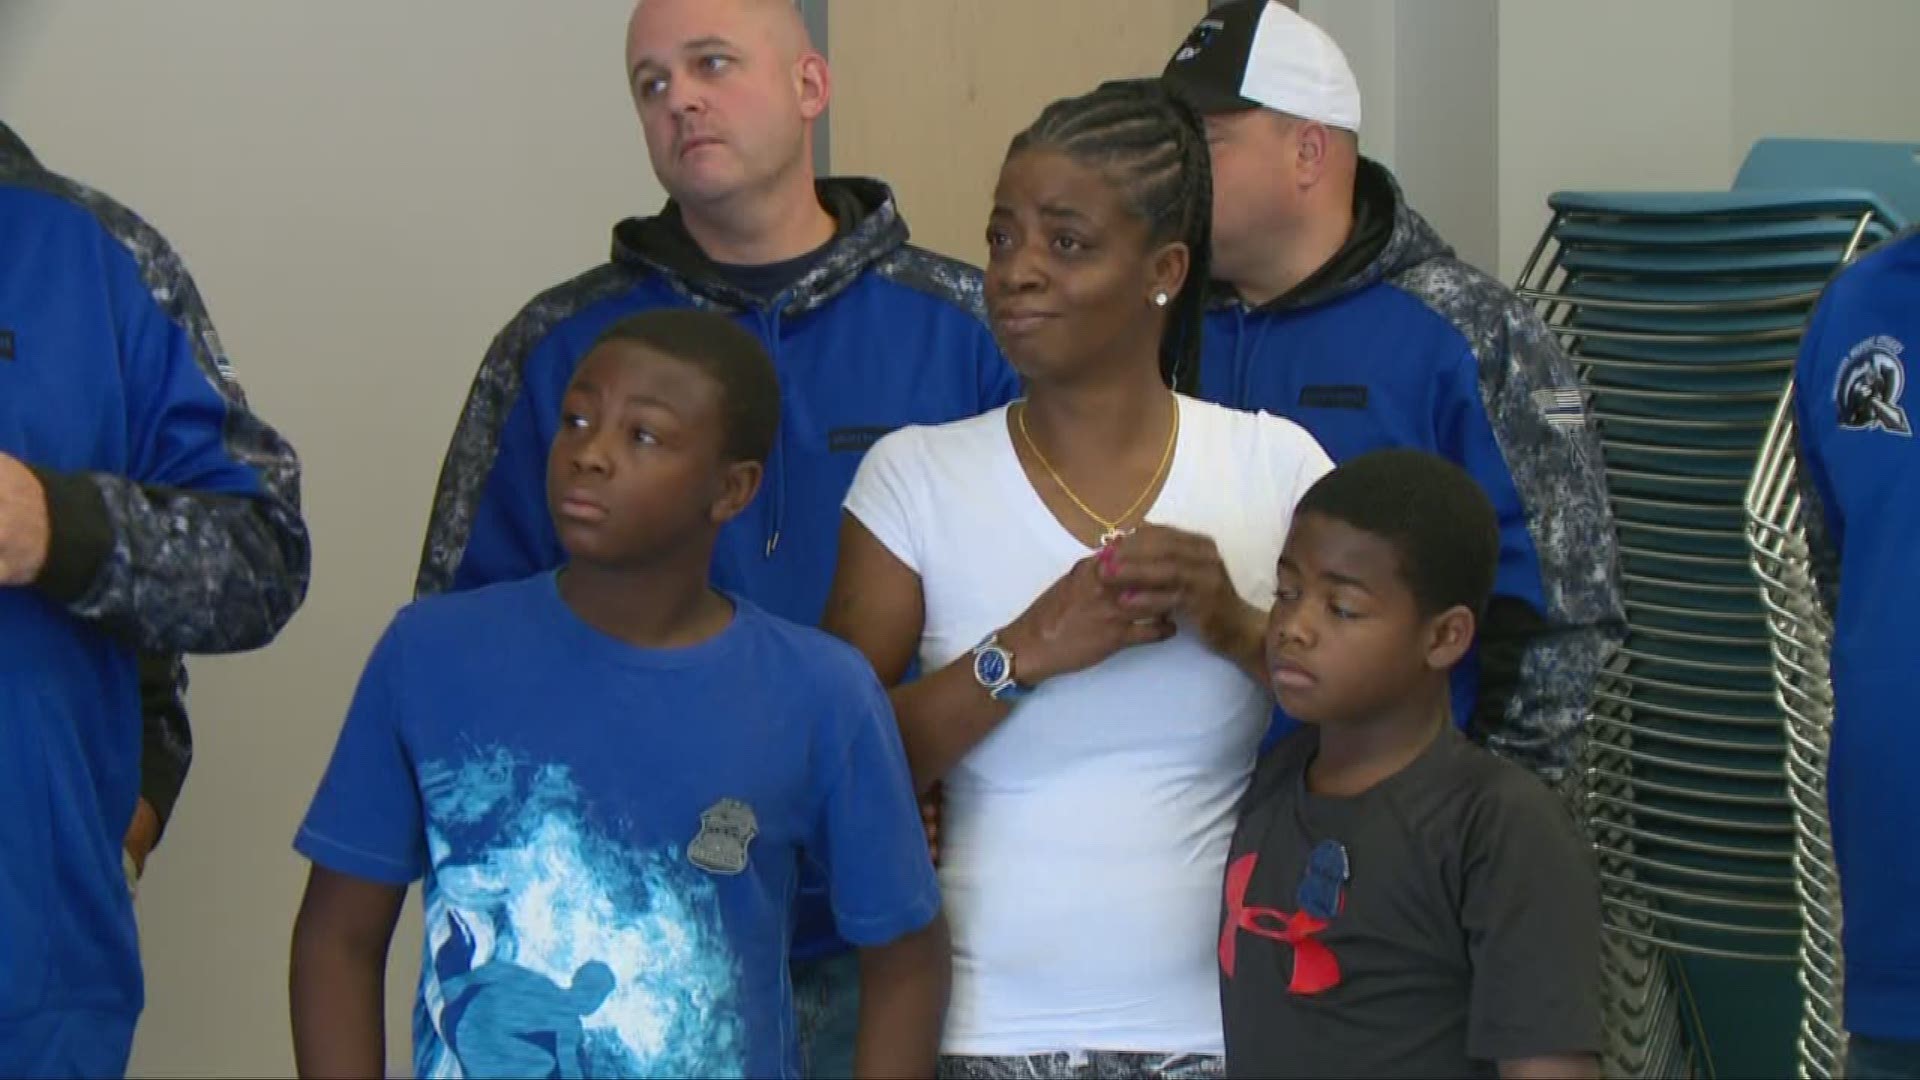 Police charity group pitches in to help out Robert Godwin Sr.'s family